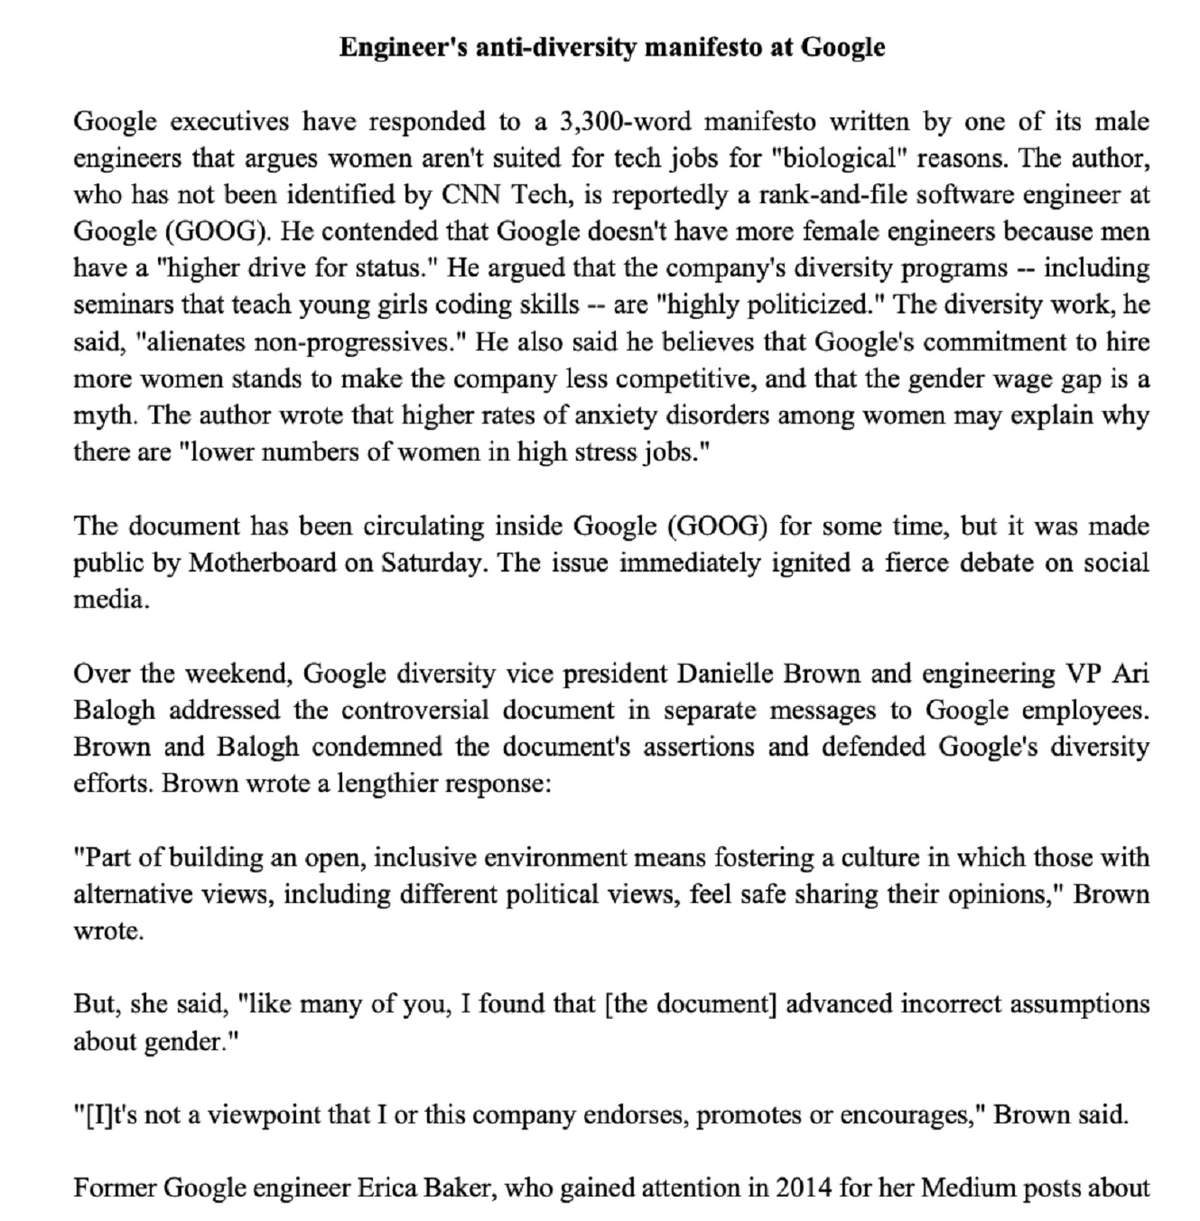 Engineer's anti-diversity manifesto at Google
Google executives have responded to a 3,300-word manifesto written by one of its male
engineers that argues women aren't suited for tech jobs for "biological" reasons. The author,
who has not been identified by CNN Tech, is reportedly a rank-and-file software engineer at
Google (GOOG). He contended that Google doesn't have more female engineers because men
have a "higher drive for status." He argued that the company's diversity programs -- including
seminars that teach young girls coding skills are "highly politicized." The diversity work, he
said, "alienates non-progressives." He also said he believes that Google's commitment to hire
more women stands to make the company less competitive, and that the gender wage gap is a
myth. The author wrote that higher rates of anxiety disorders among women may explain why
there are "lower numbers of women in high stress jobs."
The document has been circulating inside Google (GOOG) for some time, but it was made
public by Motherboard on Saturday. The issue immediately ignited a fierce debate on social
media.
Over the weekend, Google diversity vice president Danielle Brown and engineering VP Ari
Balogh addressed the controversial document in separate messages to Google employees.
Brown and Balogh condemned the document's assertions and defended Google's diversity
efforts. Brown wrote a lengthier response:
"Part of building an open, inclusive environment means fostering a culture in which those with
alternative views, including different political views, feel safe sharing their opinions," Brown
wrote.
But, she said, "like many of you, I found that [the document] advanced incorrect assumptions
about gender."
"[I]t's not a viewpoint that I or this company endorses, promotes or encourages," Brown said.
Former Google engineer Erica Baker, who gained attention in 2014 for her Medium posts about